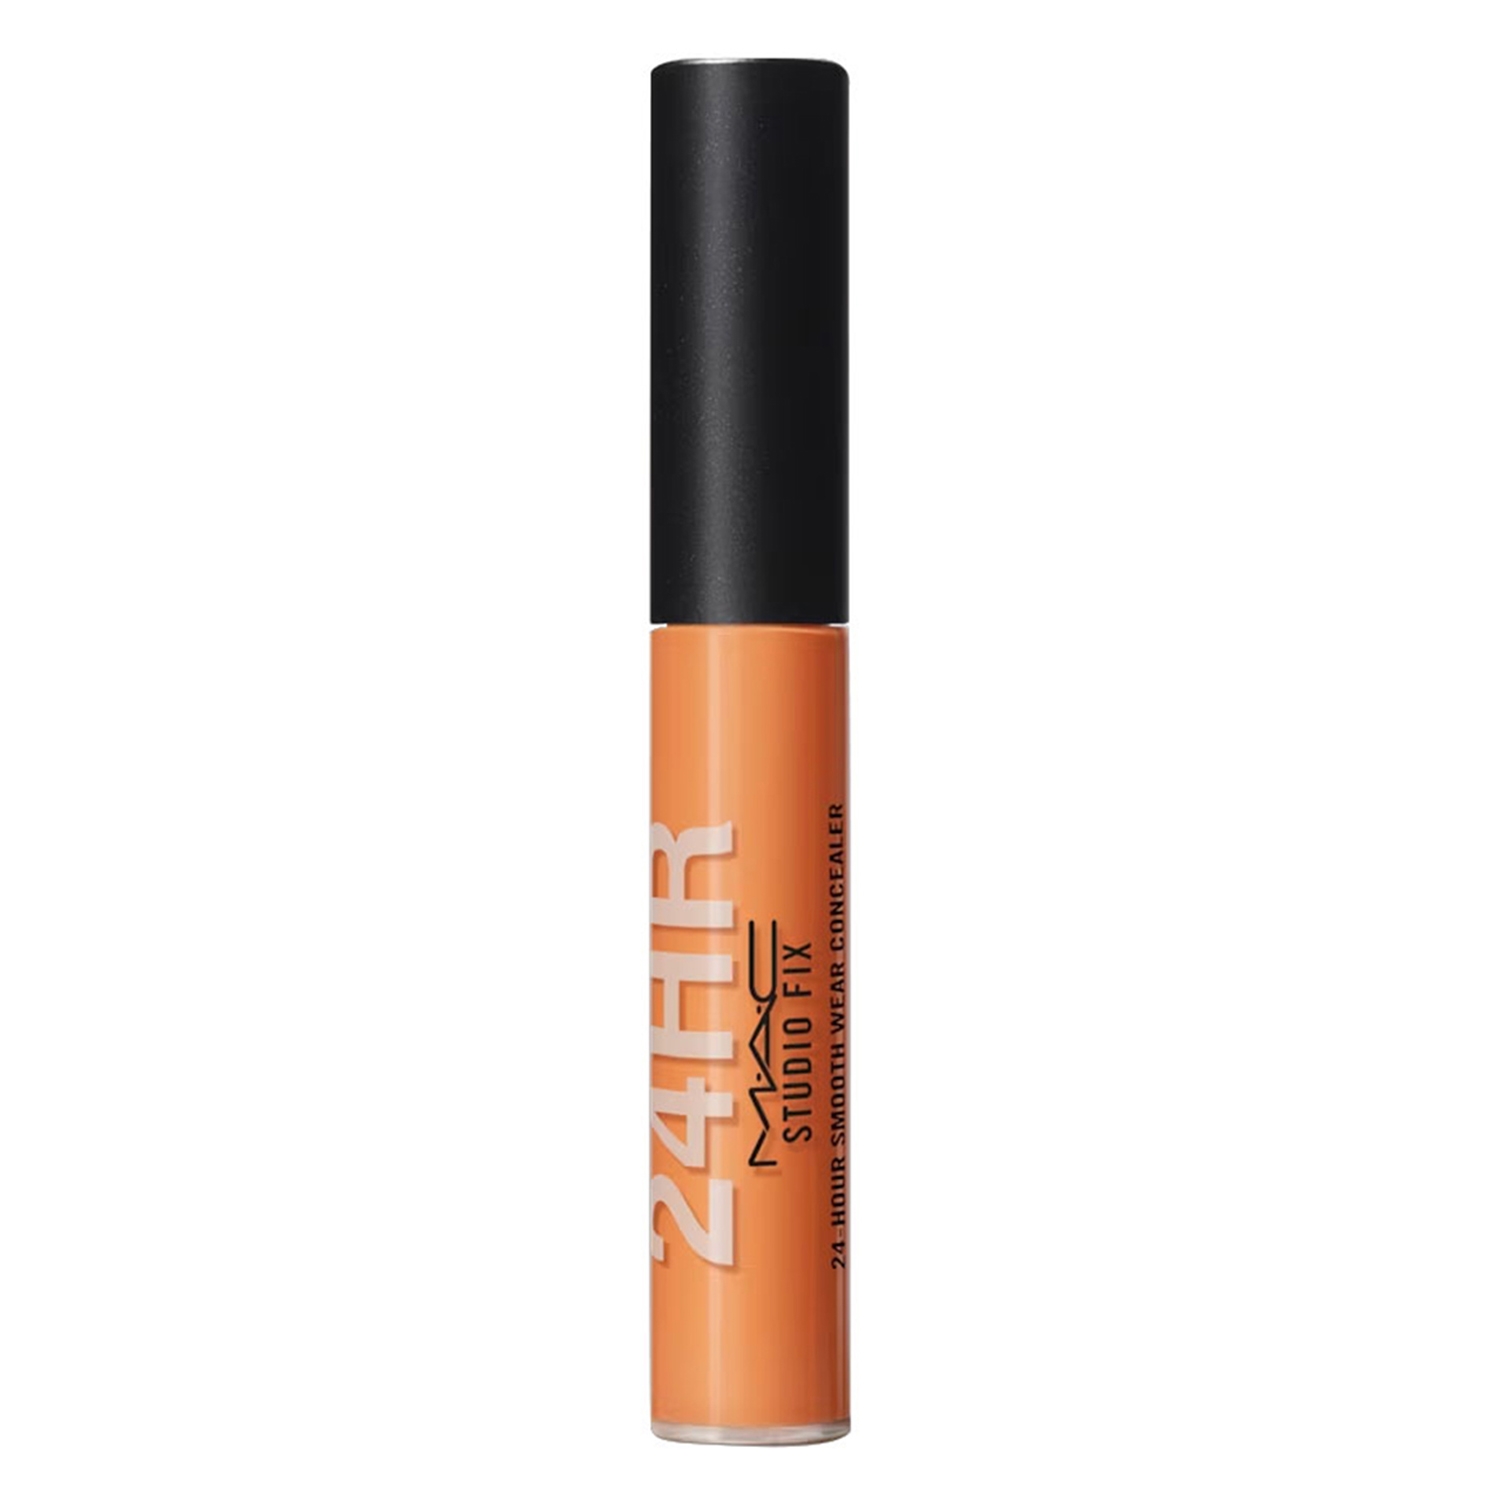 M.A.C | M.A.C Studio Fix 24-Hour Smooth Wear Concealer - NW45 (7ml)